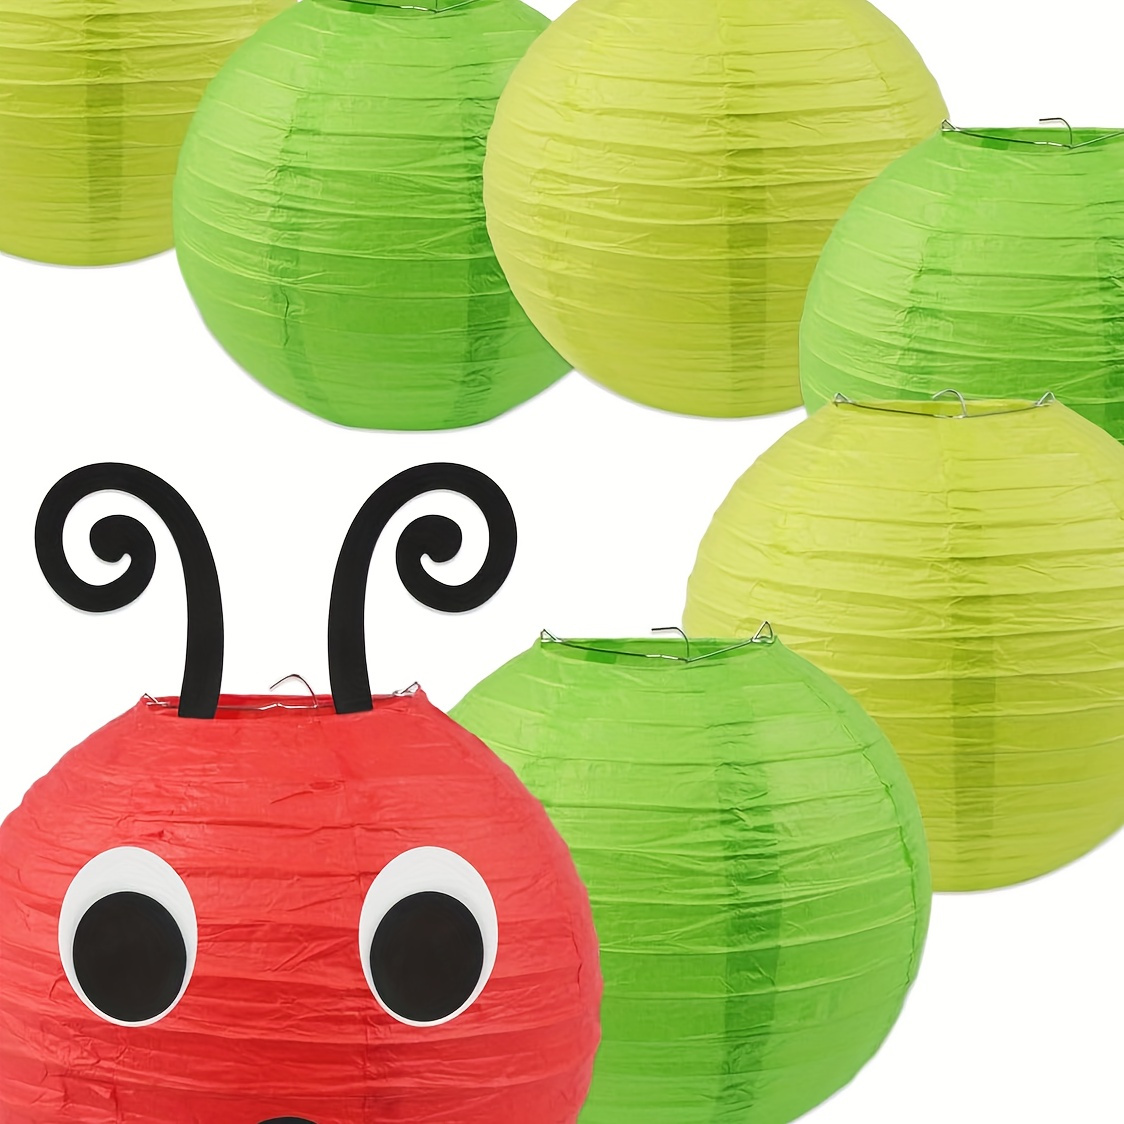 

7pcs For Caterpillar Paper Lanterns Set - Red & Green With Eyes And Mouth Design For Classroom, Birthday Party Decor | No Power Needed, Classic Style Paper Lanterns Decoration